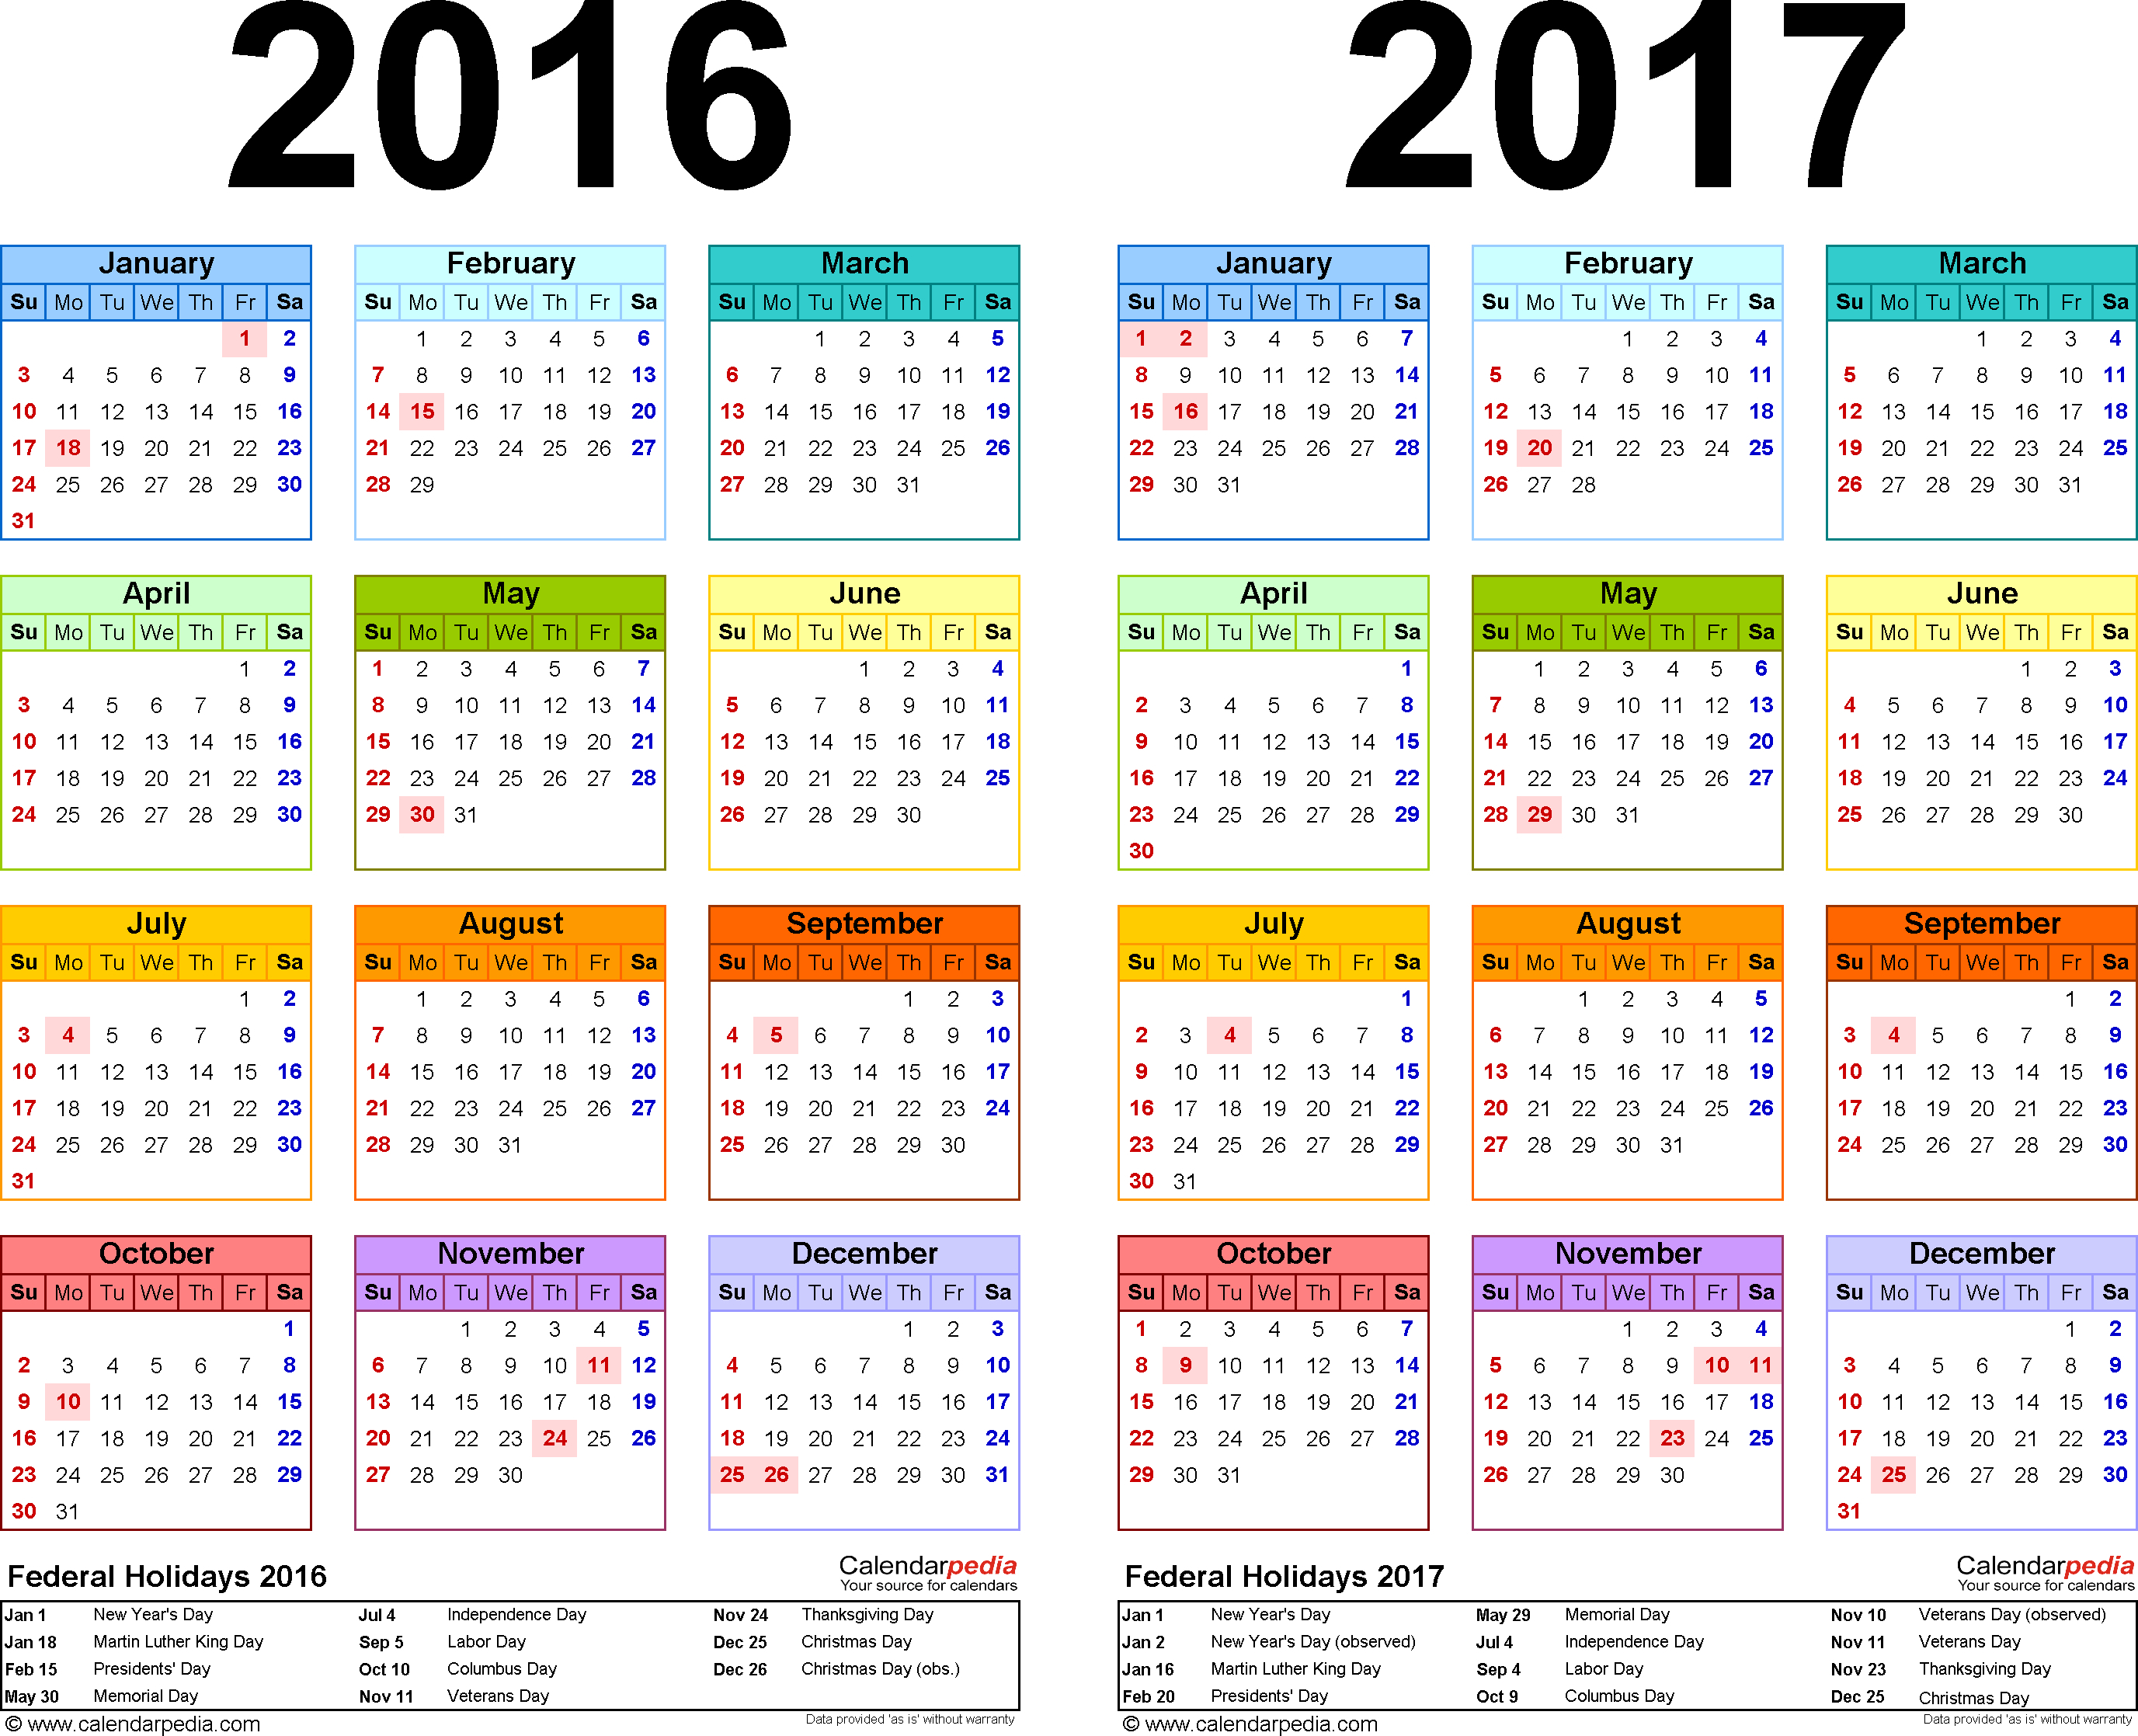 Yearly Calendar 2017 | Templates Free Printable with regard to 2017 School Calendar South Africa